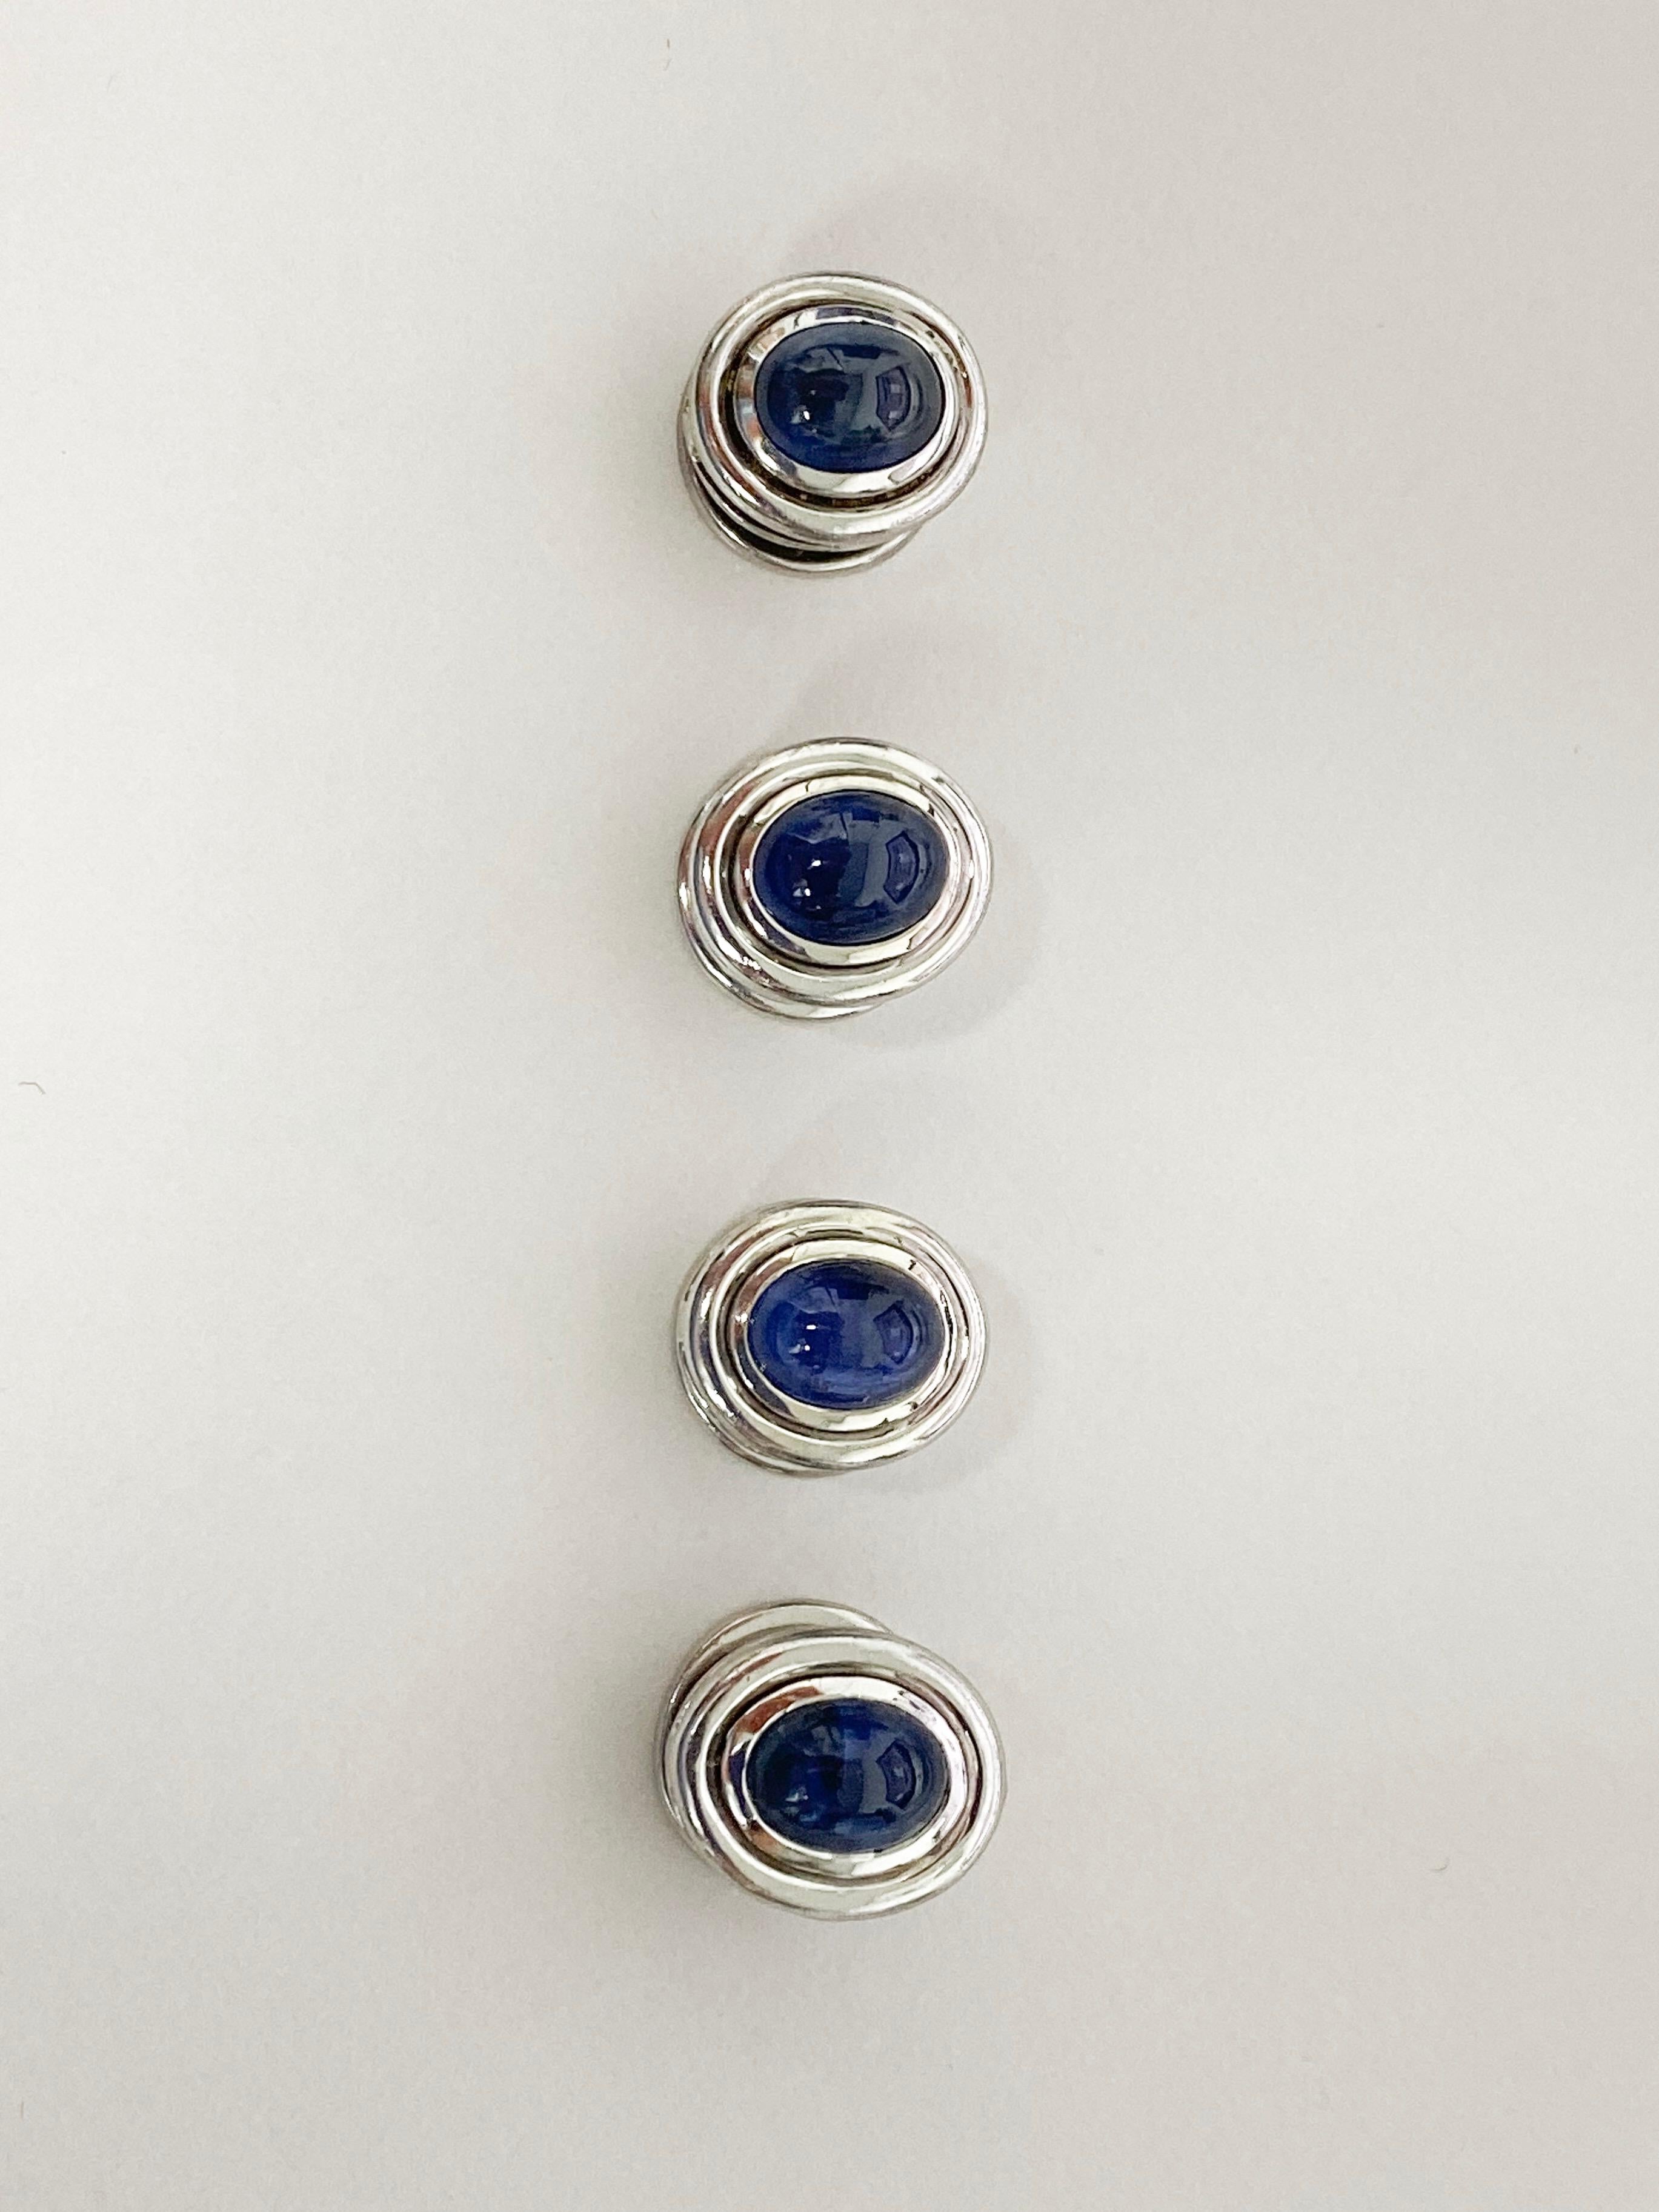 6 Carat Sapphire Cabochon Cufflinks and Studs Set in 18 Karat White Gold For Sale 2